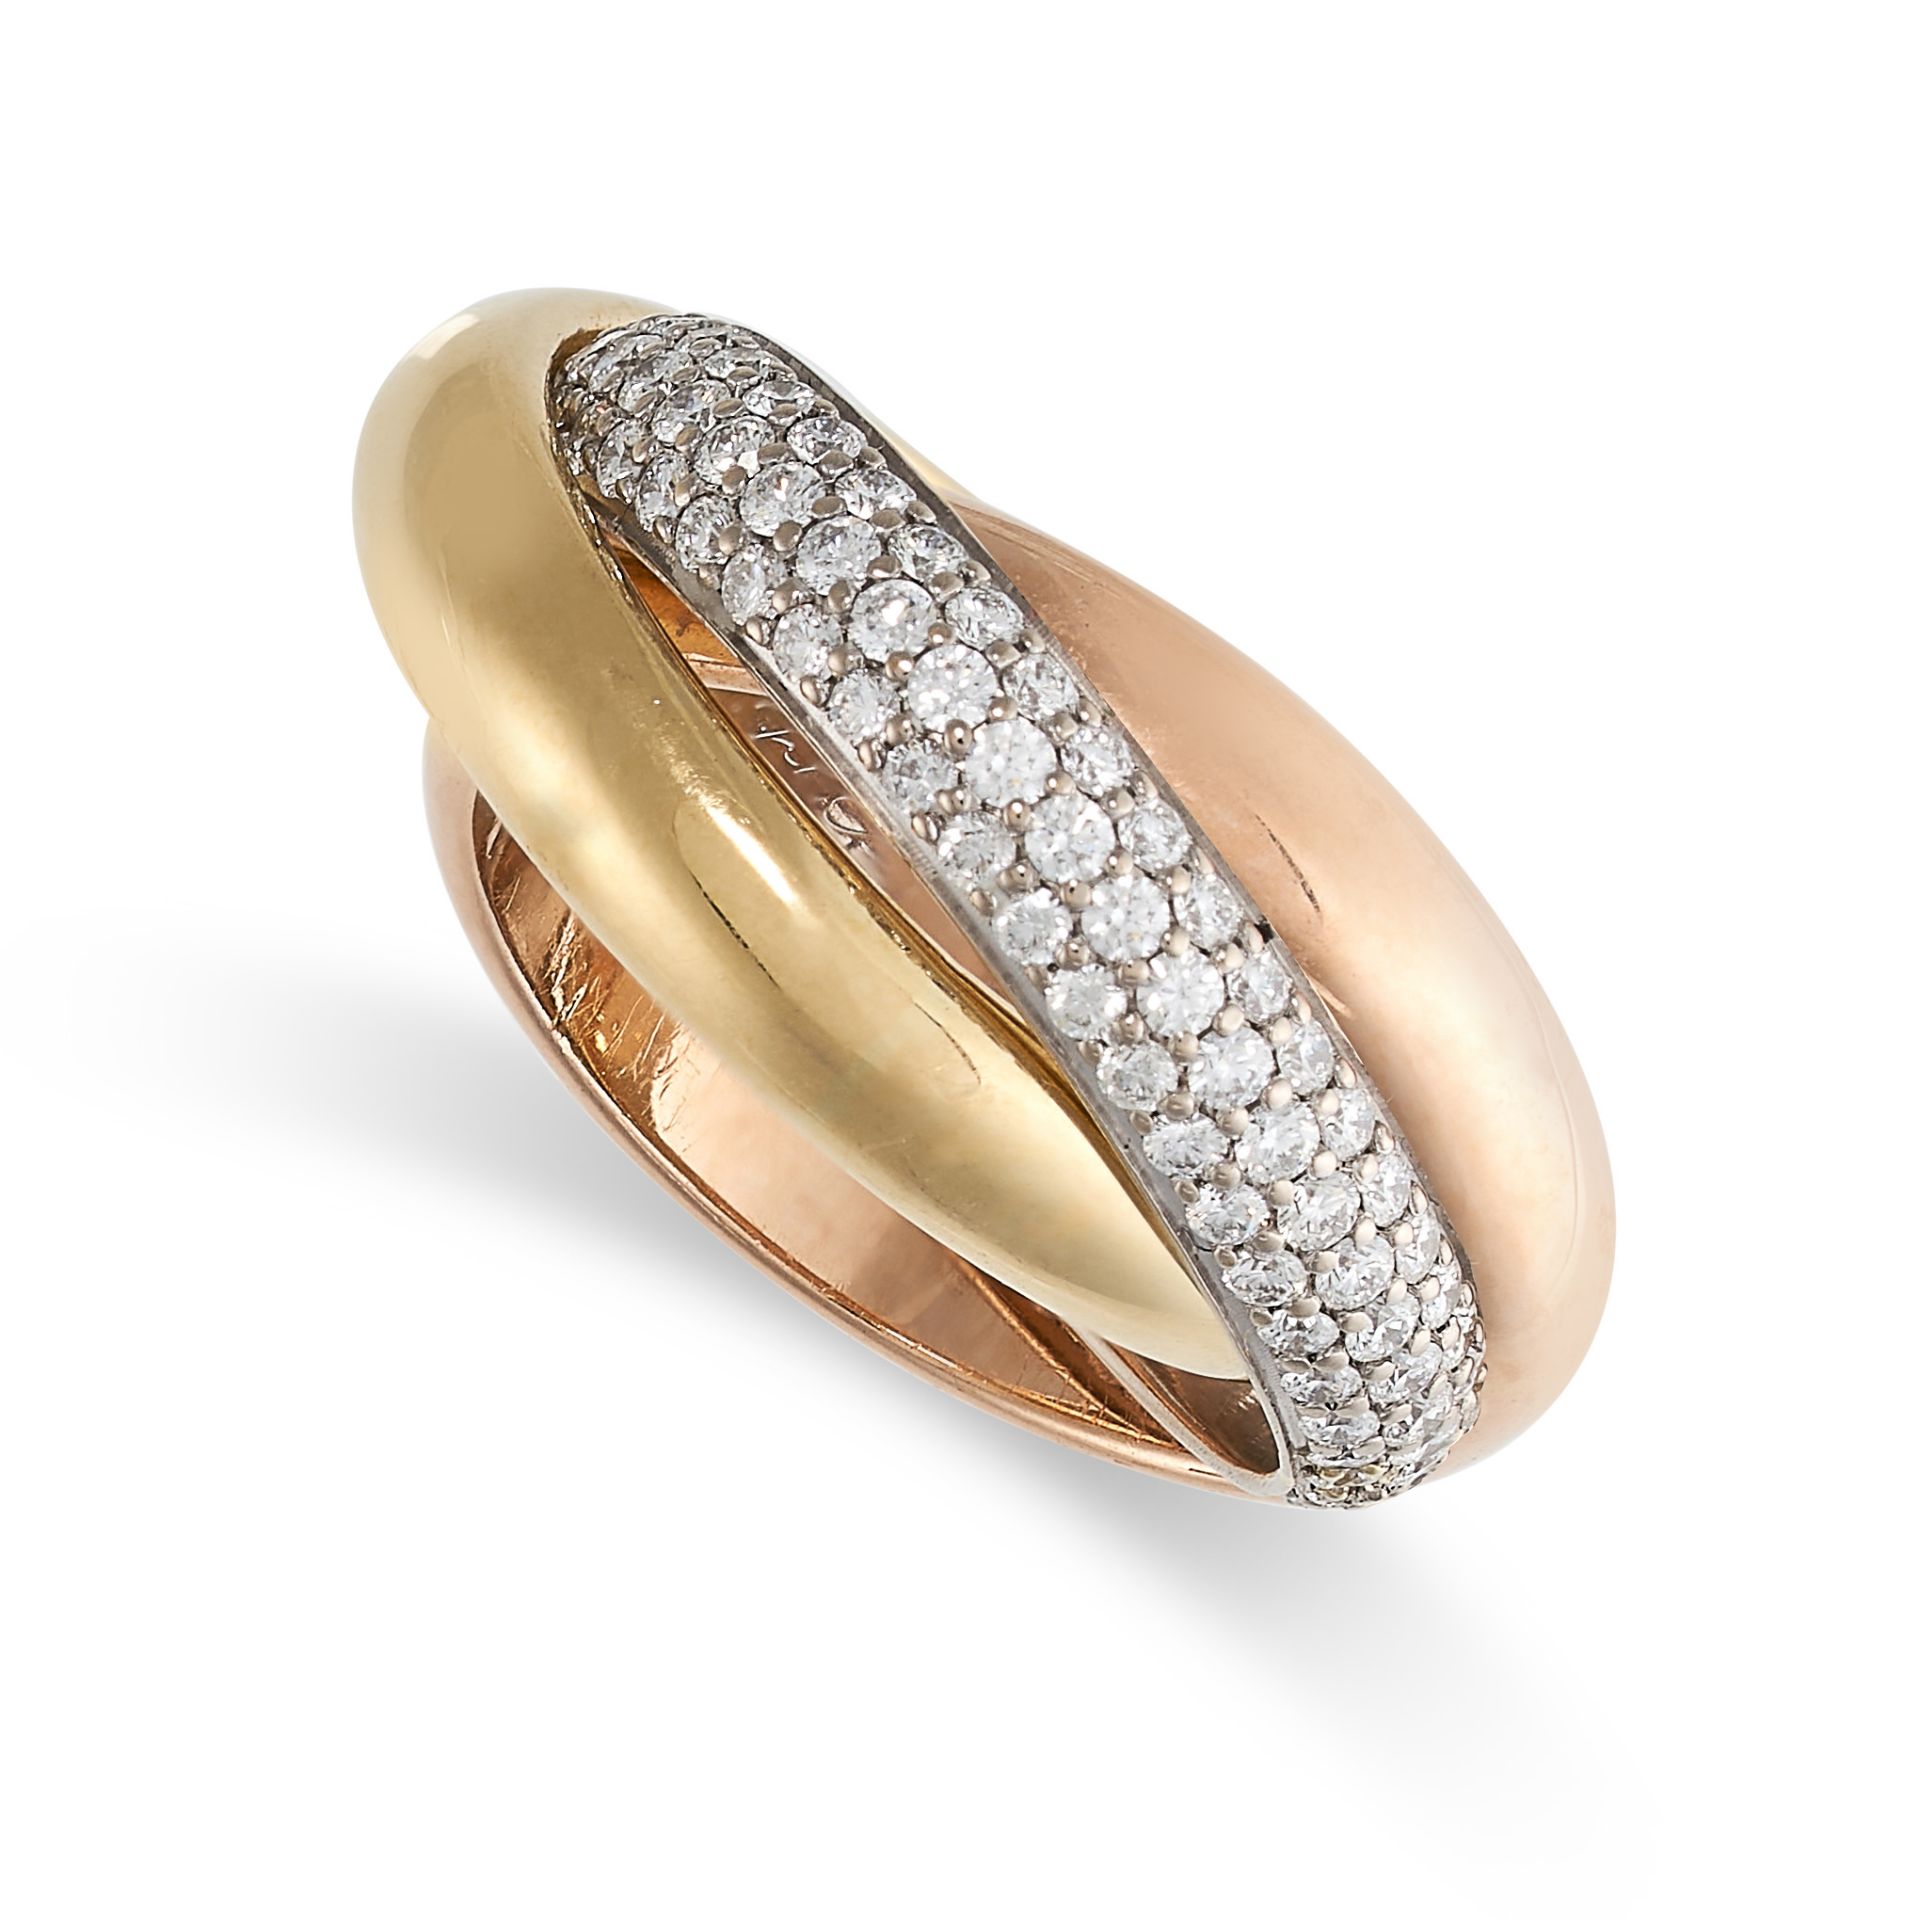 CARTIER, A TRINITY DE CARTIER DIAMOND RING in 18ct white, rose and yellow gold, the white gold